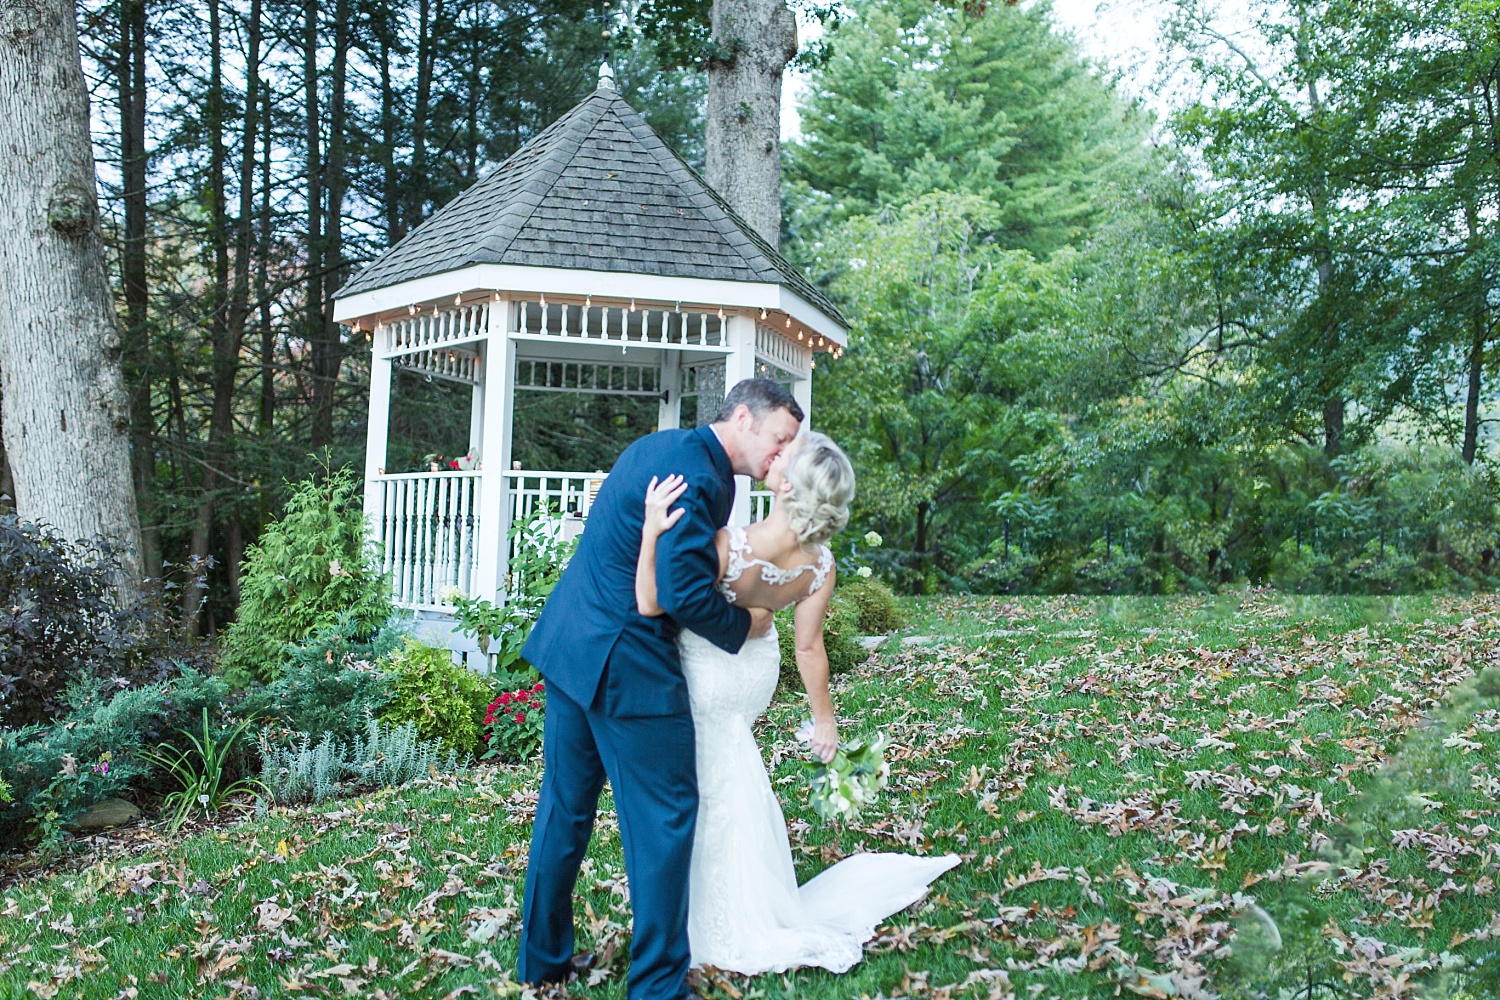 Groom dipping the bride and giving her a kiss in front of a gazebo